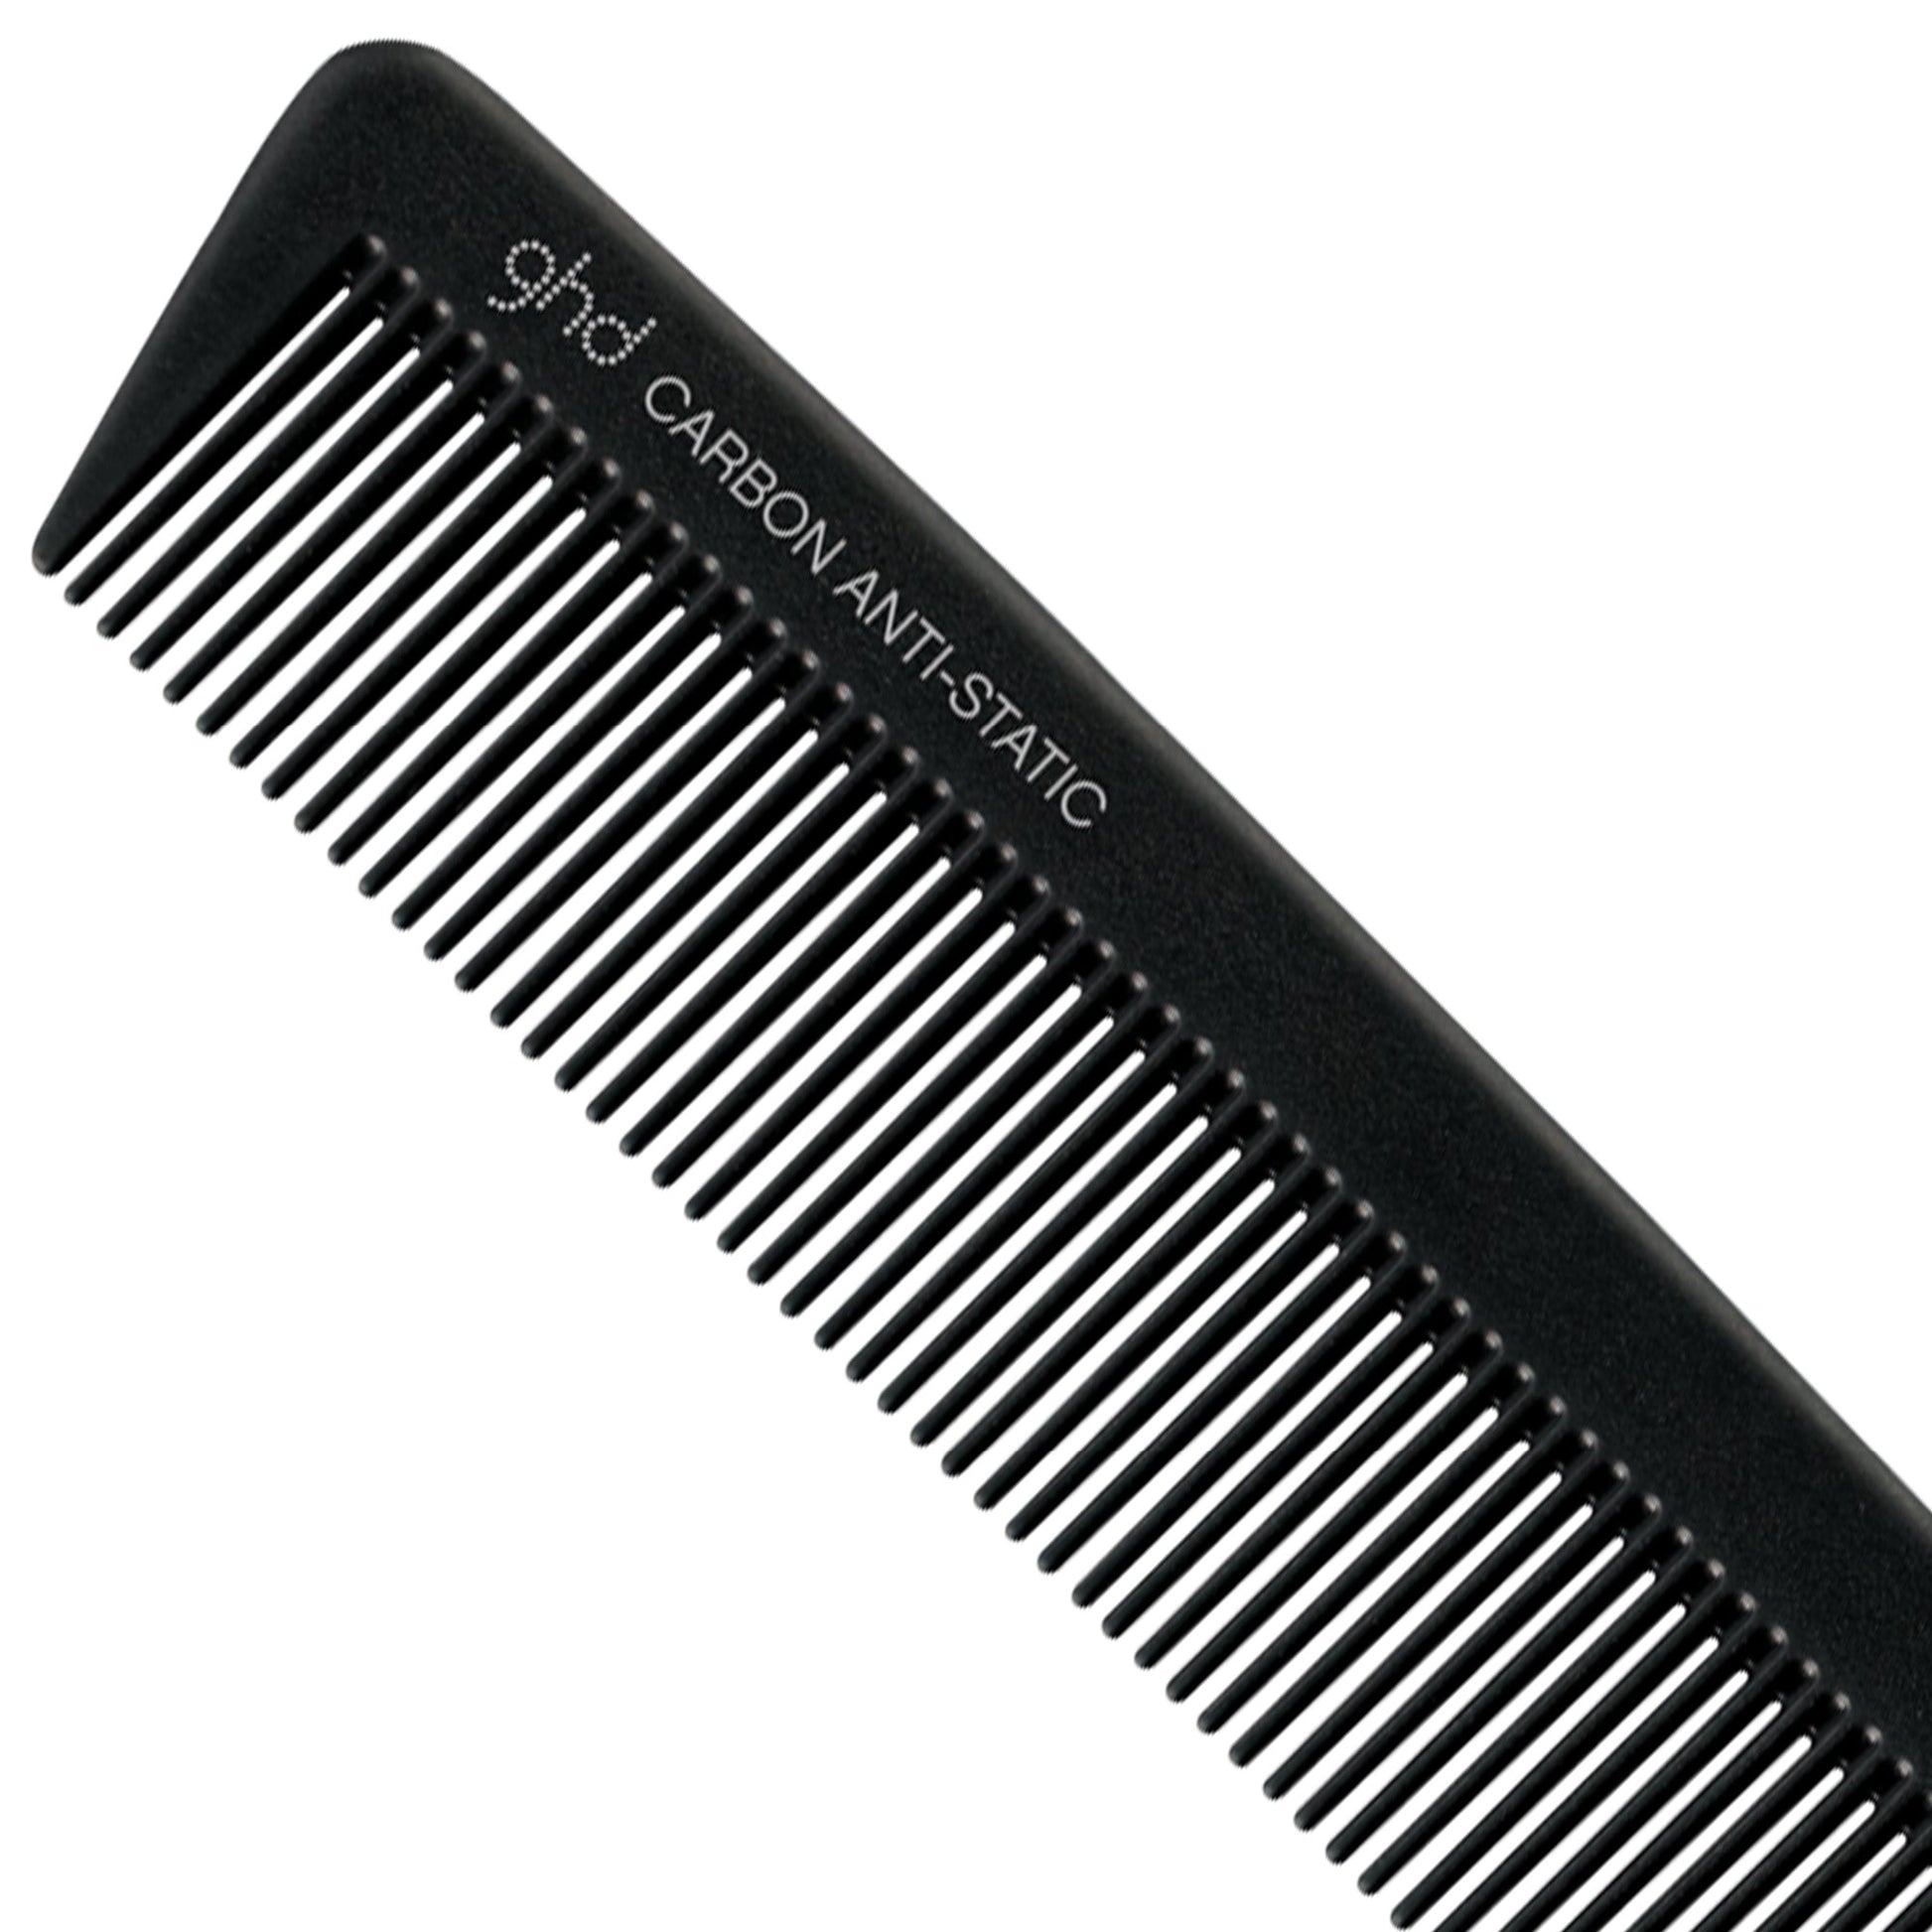 GHD Tail Comb - shelley and co